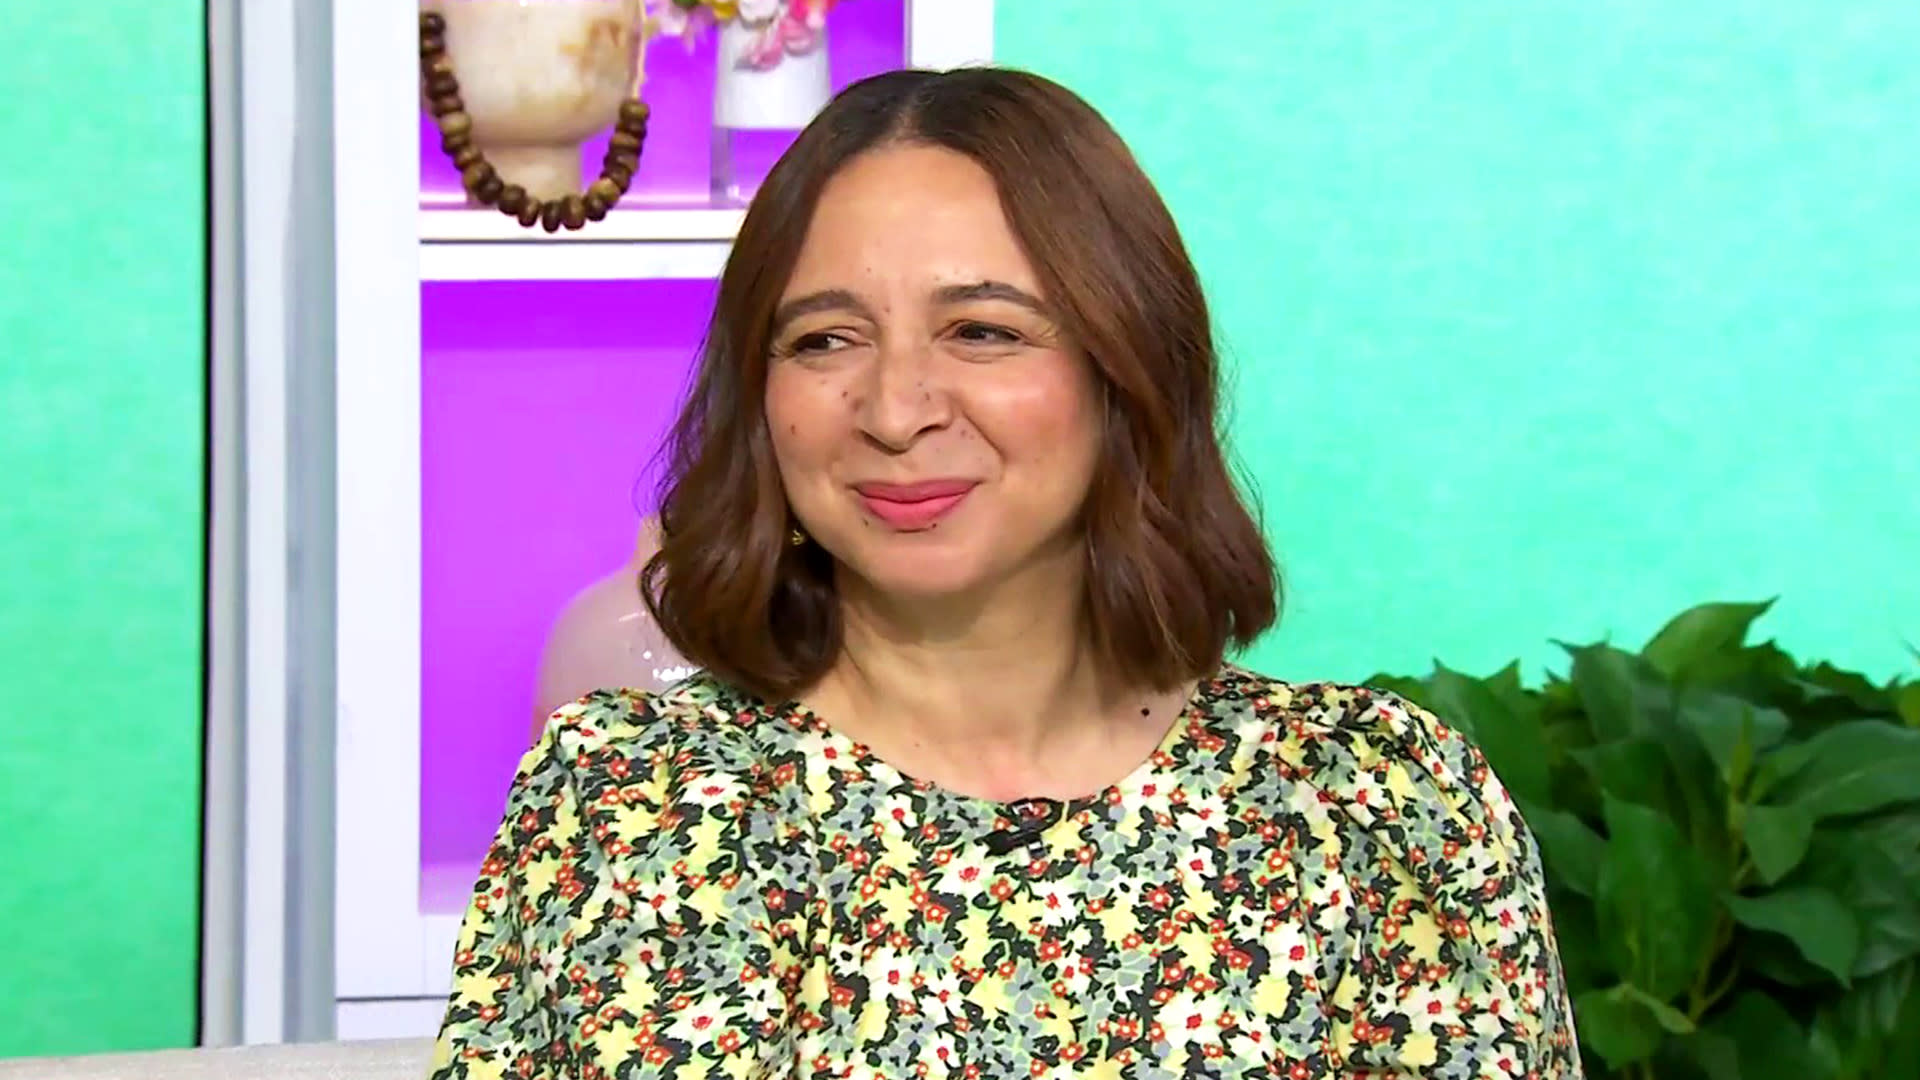 M&M'S says it's taking a 'pause' from polarizing spokescandies, taps Maya  Rudolph to represent product - ABC7 San Francisco